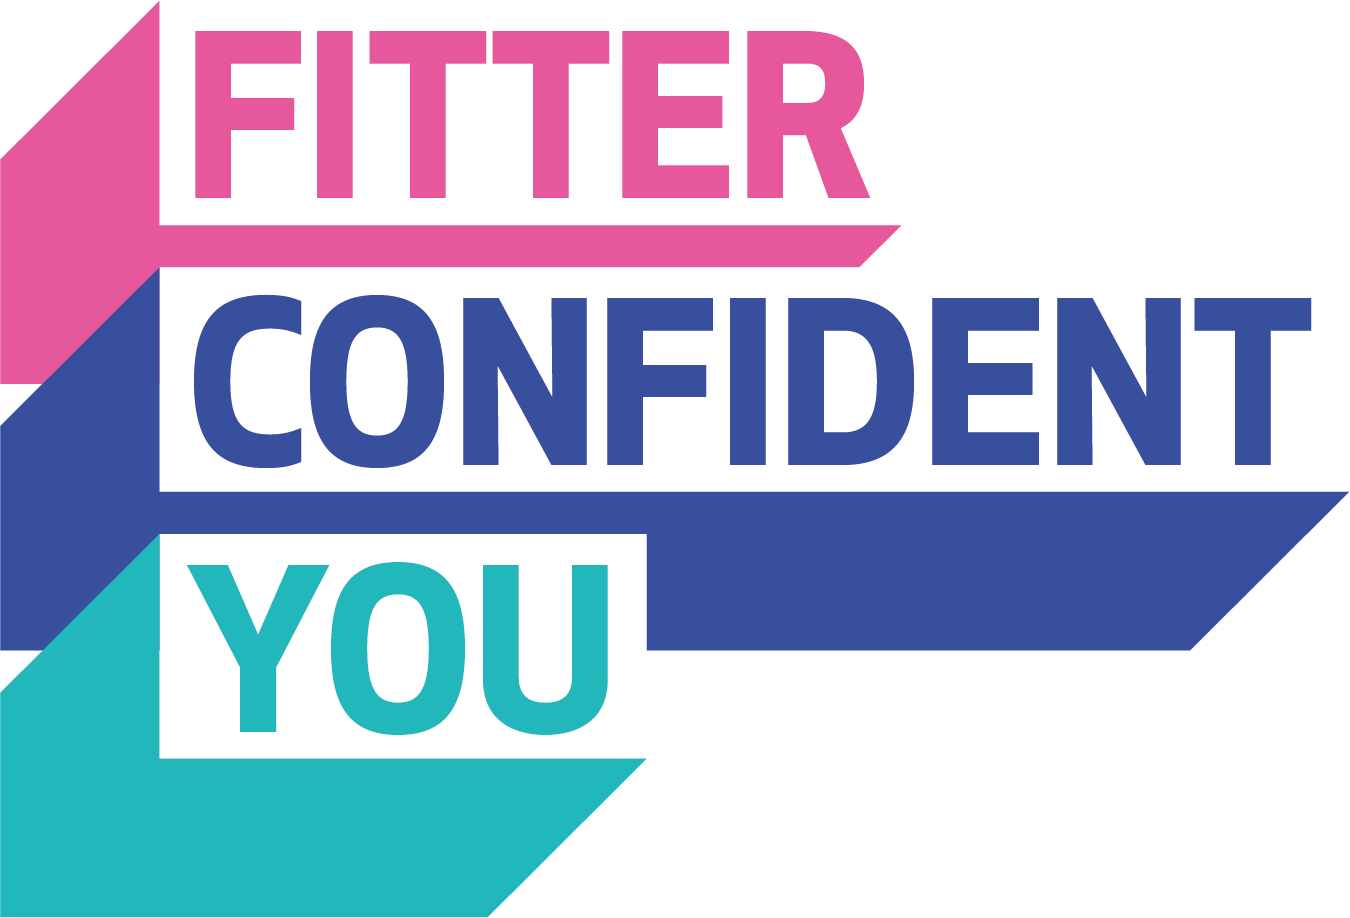 Fitter Confident You - White-04 (4).png